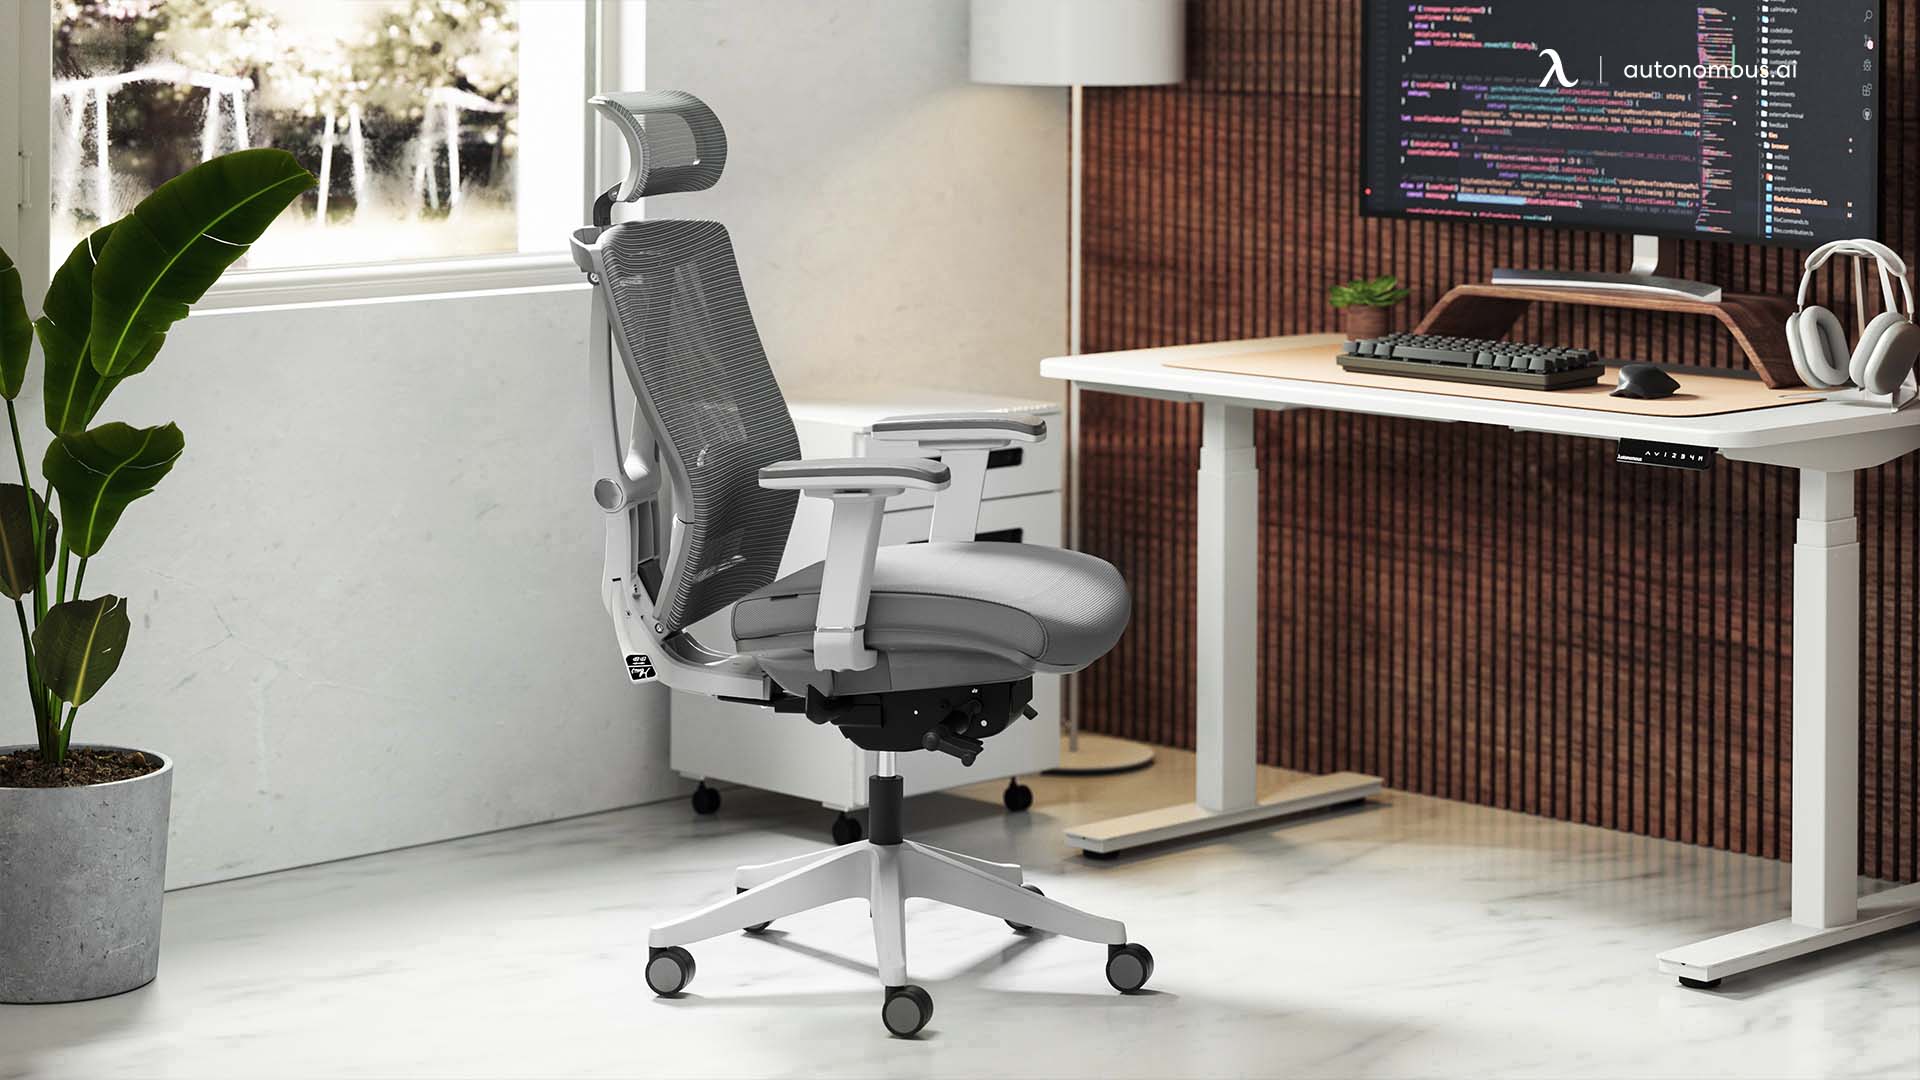 Posture chair for home workspace